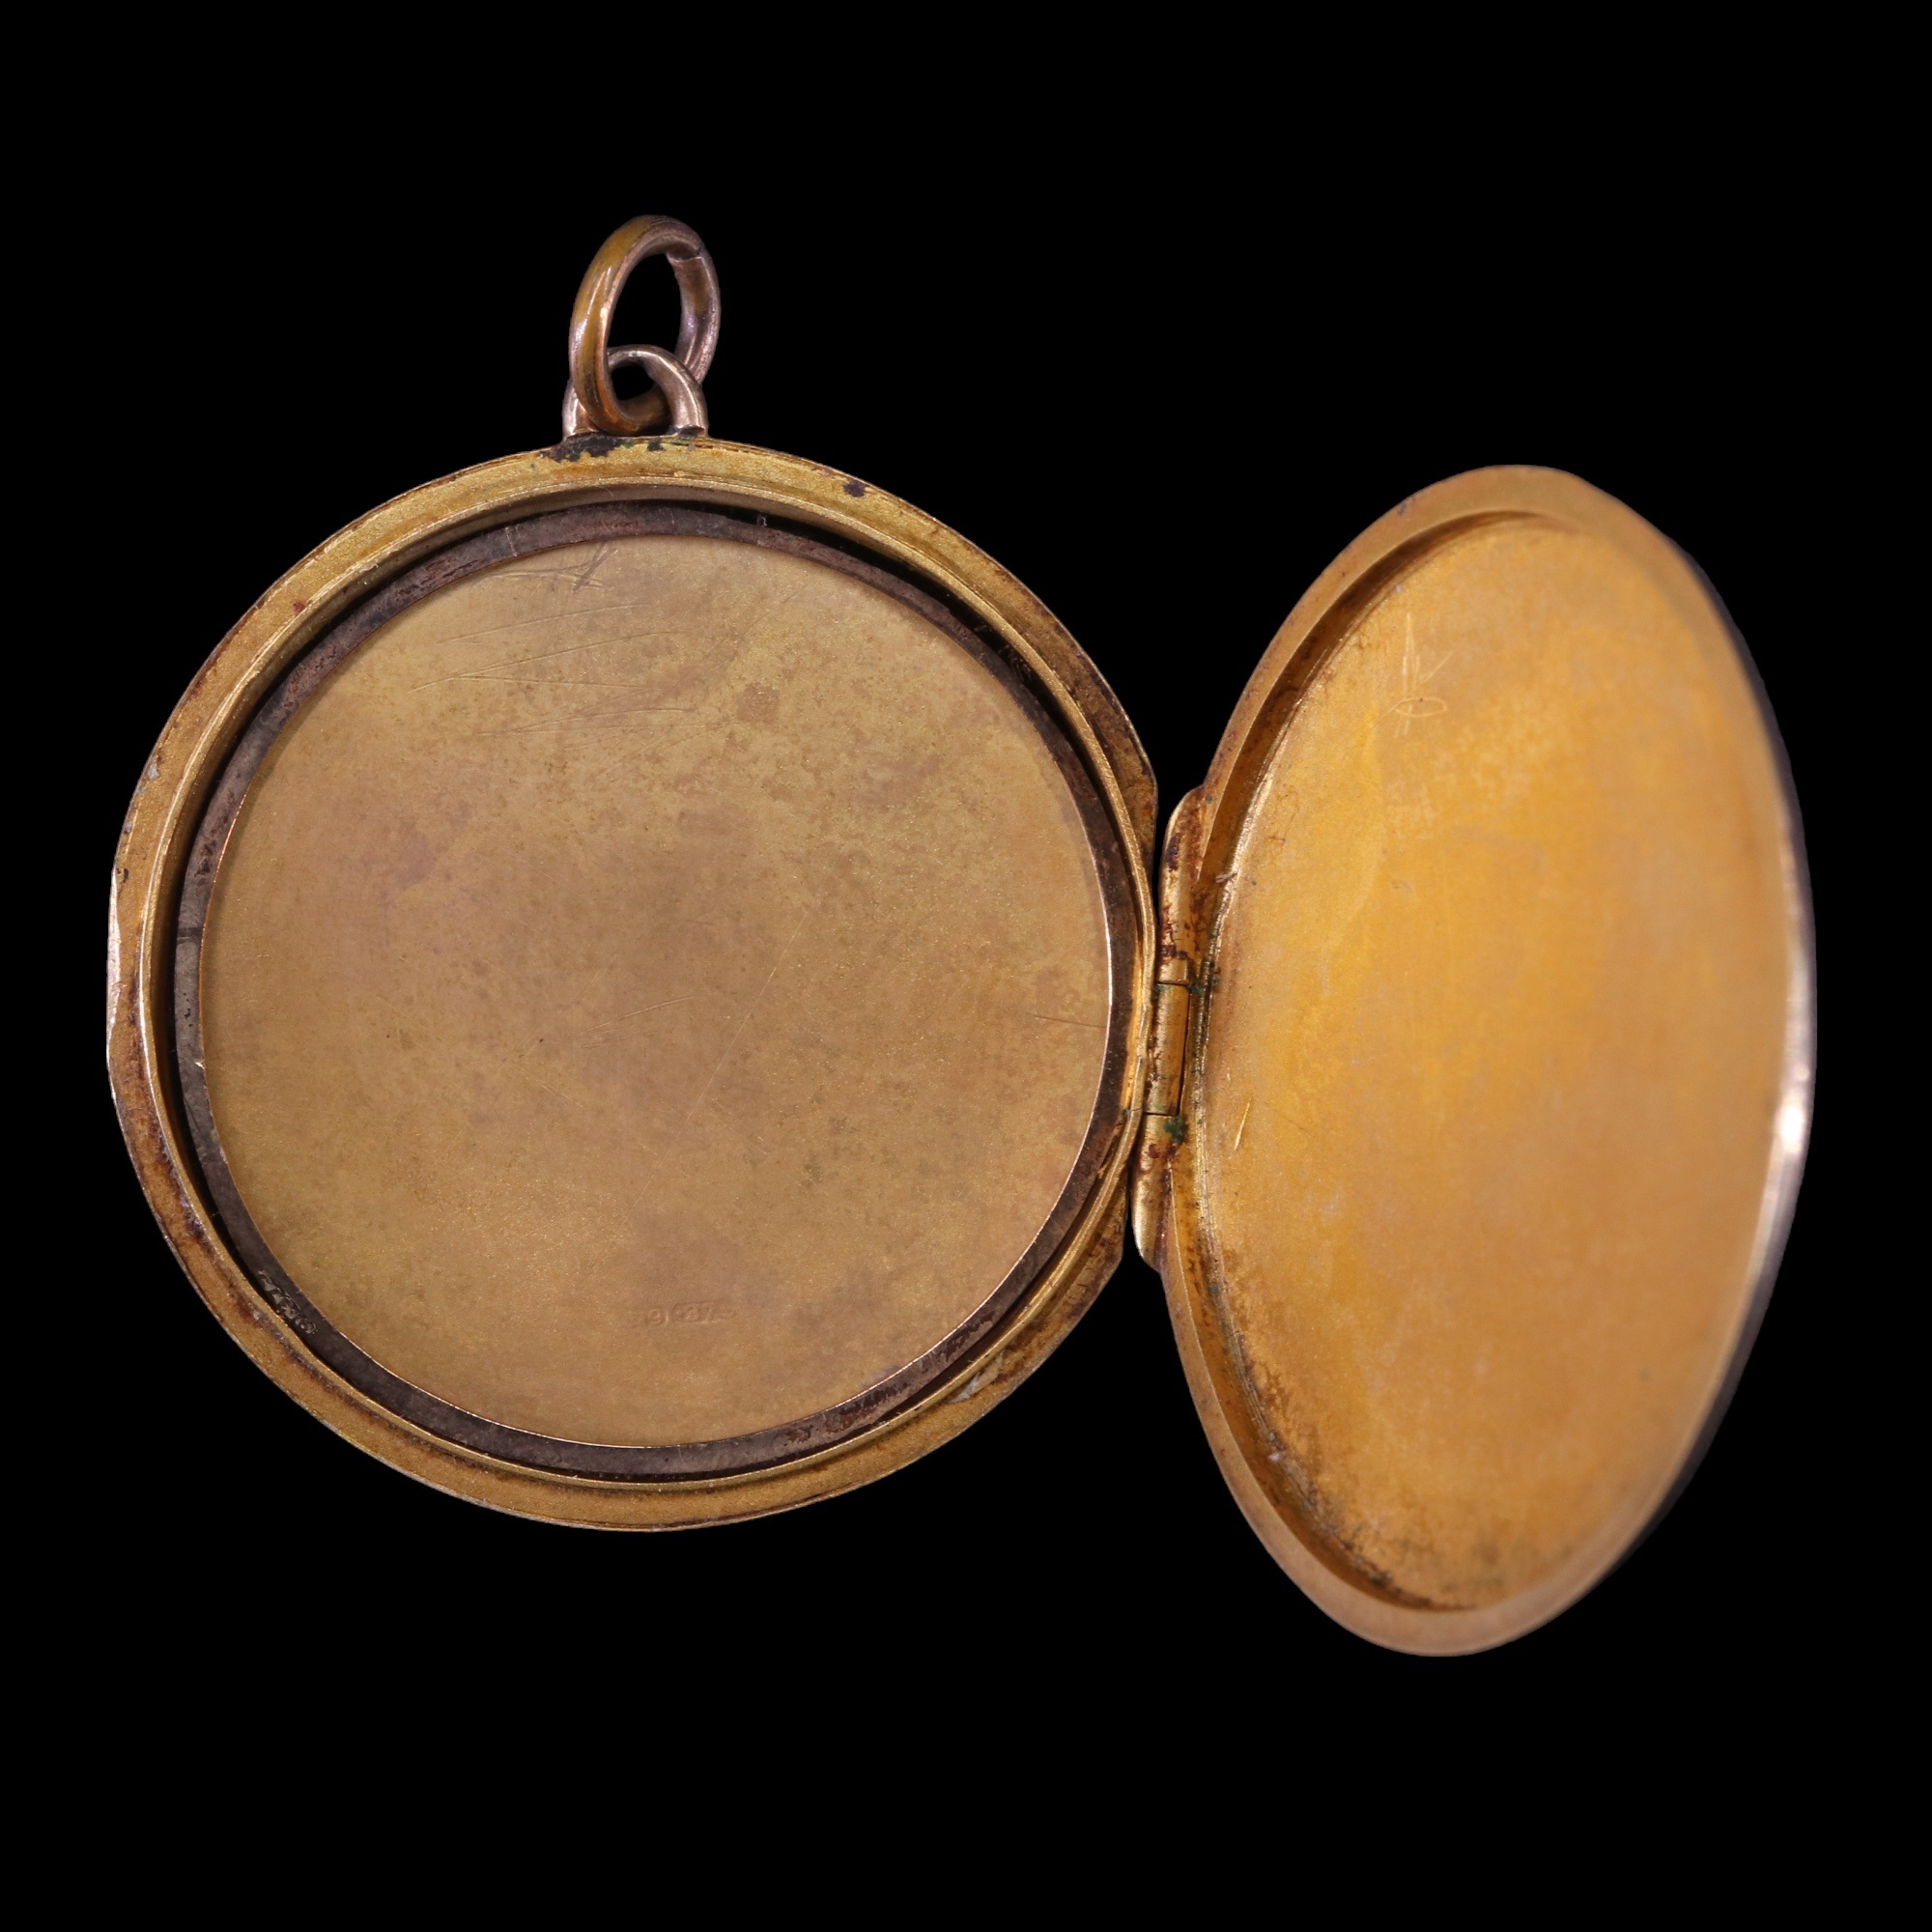 A 1939 9 ct gold circular pendant double locket, 32 mm, 6.6 g - Image 4 of 4